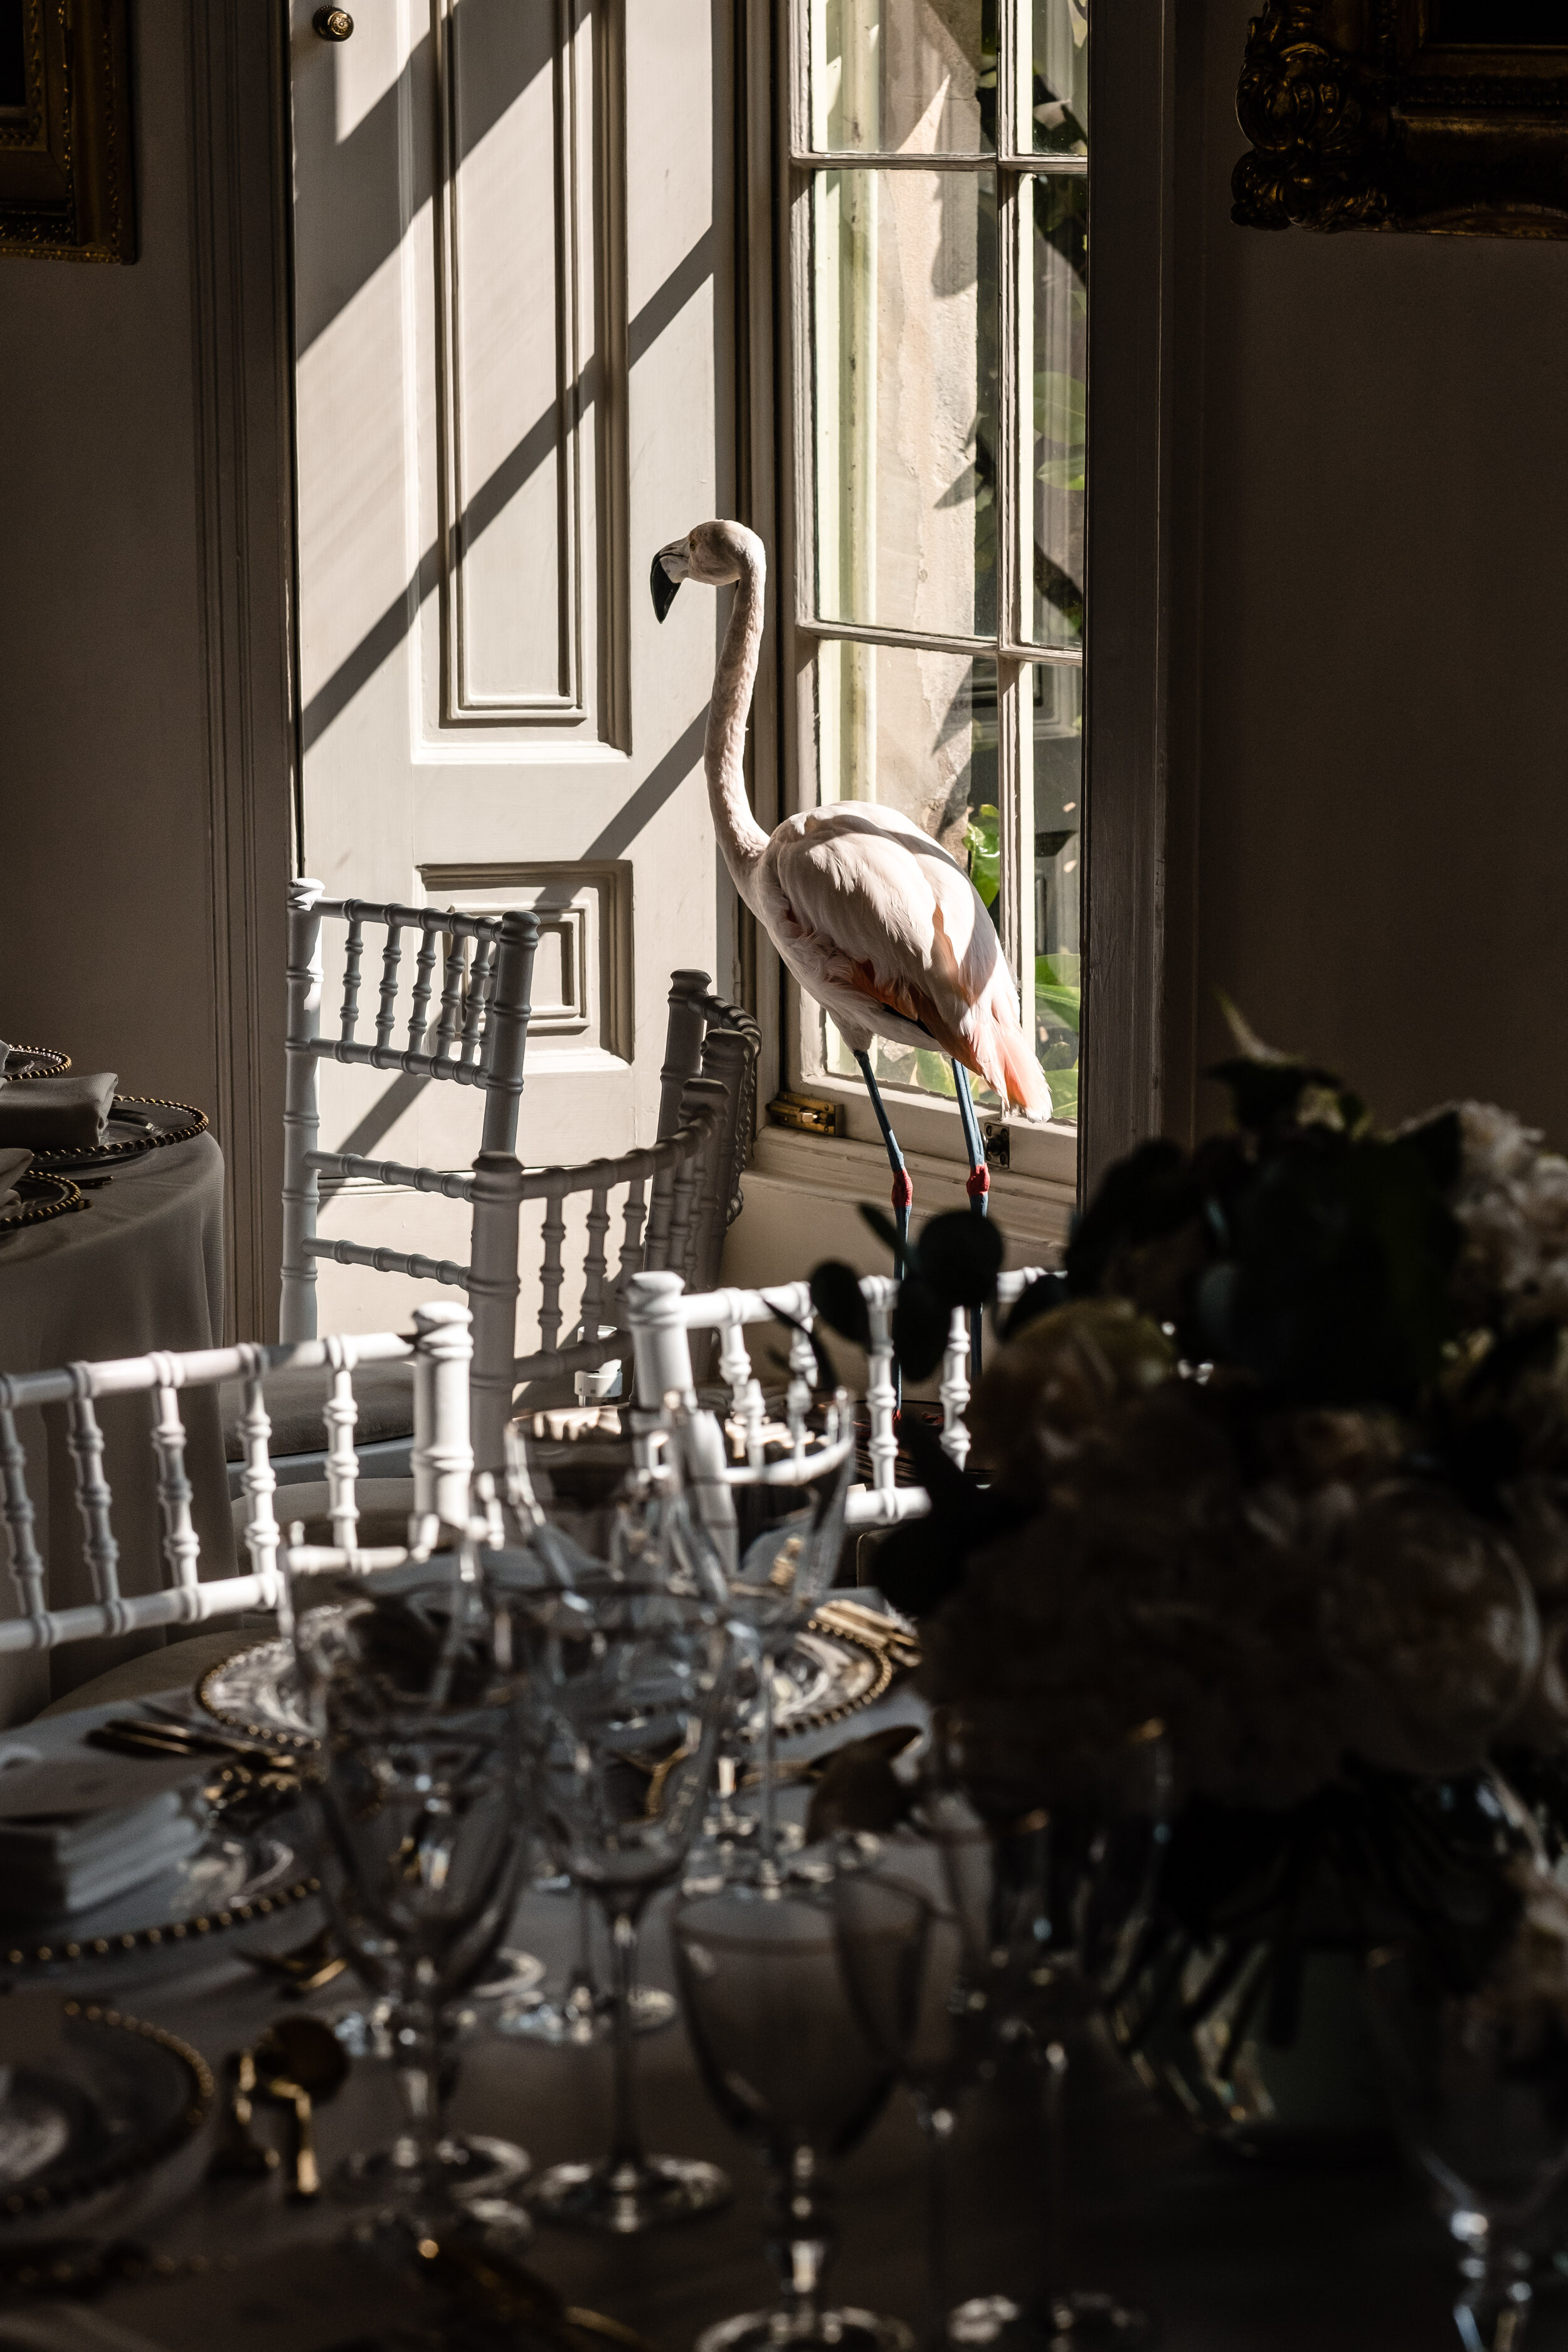 shadowy window with stuffed pelican in a dining room